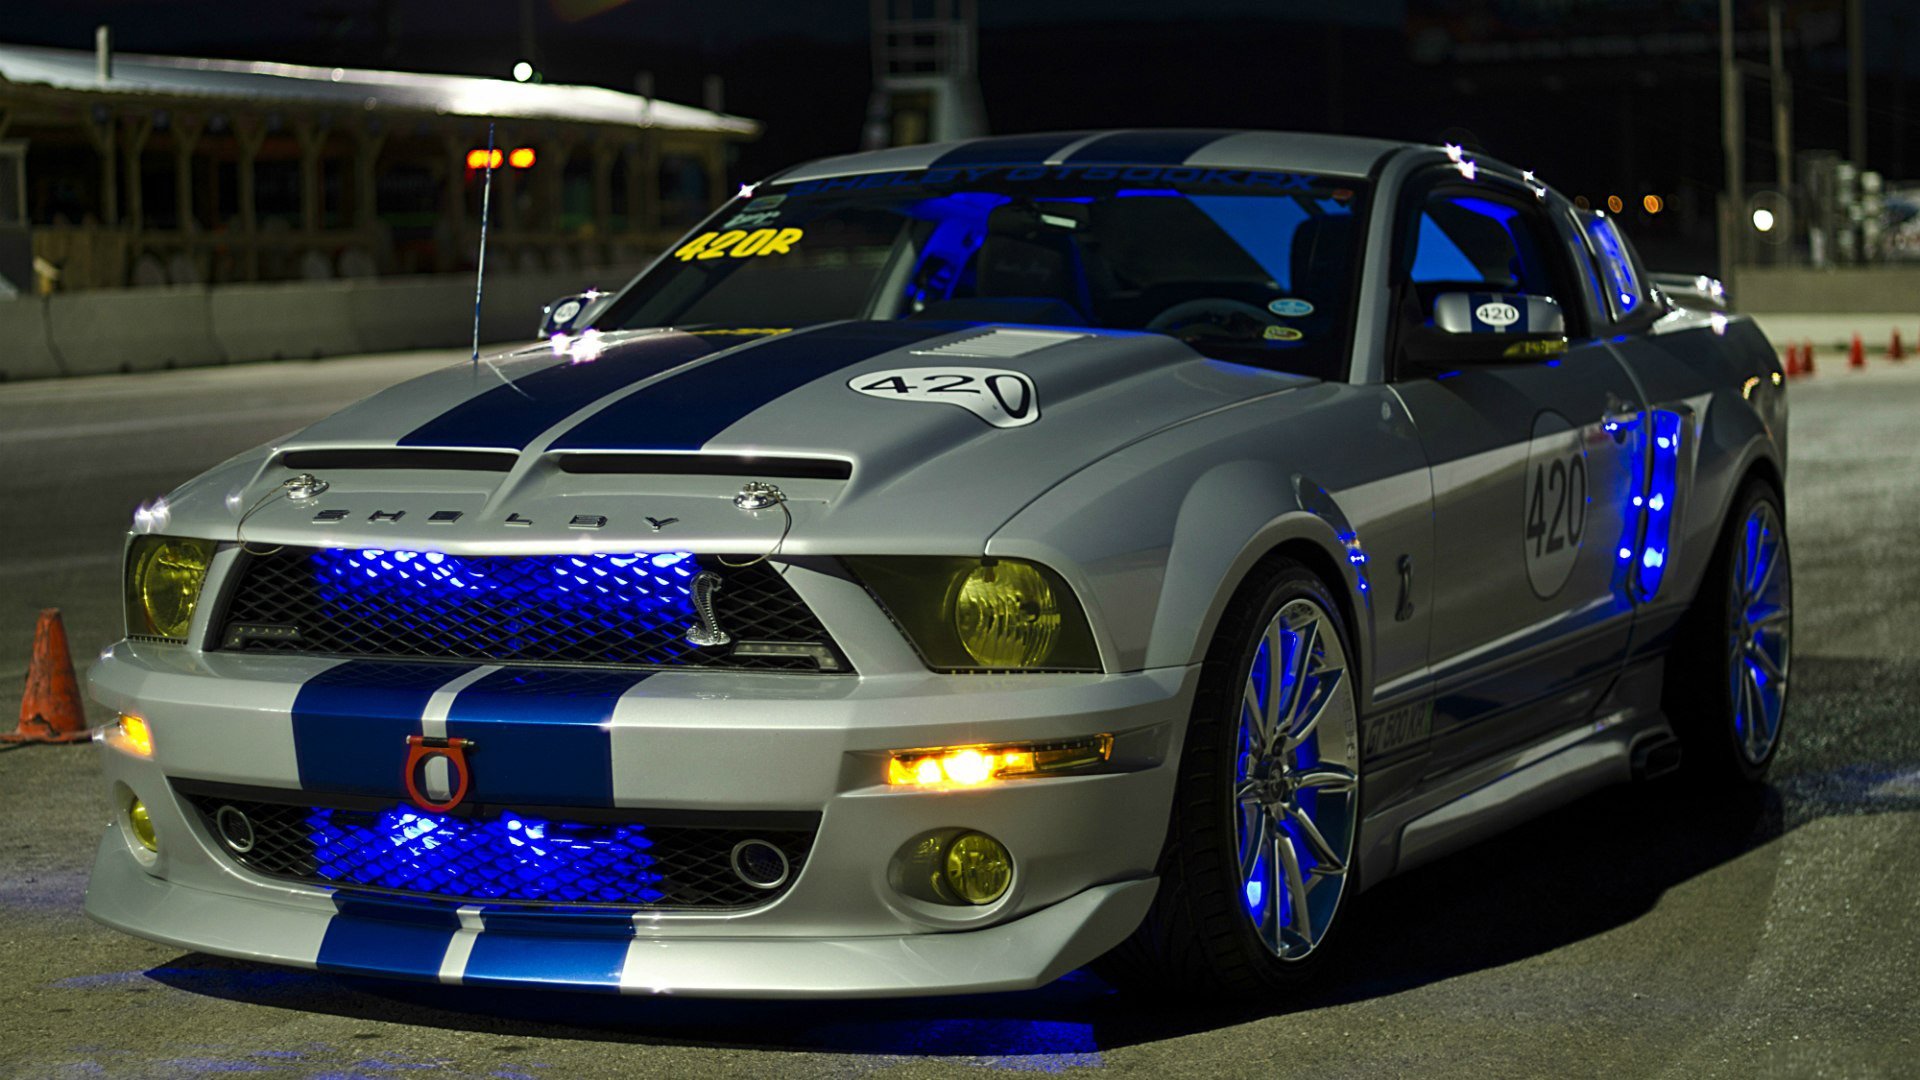 Ford Mustang Shelby Gt500 Full HD Wallpaper And Background